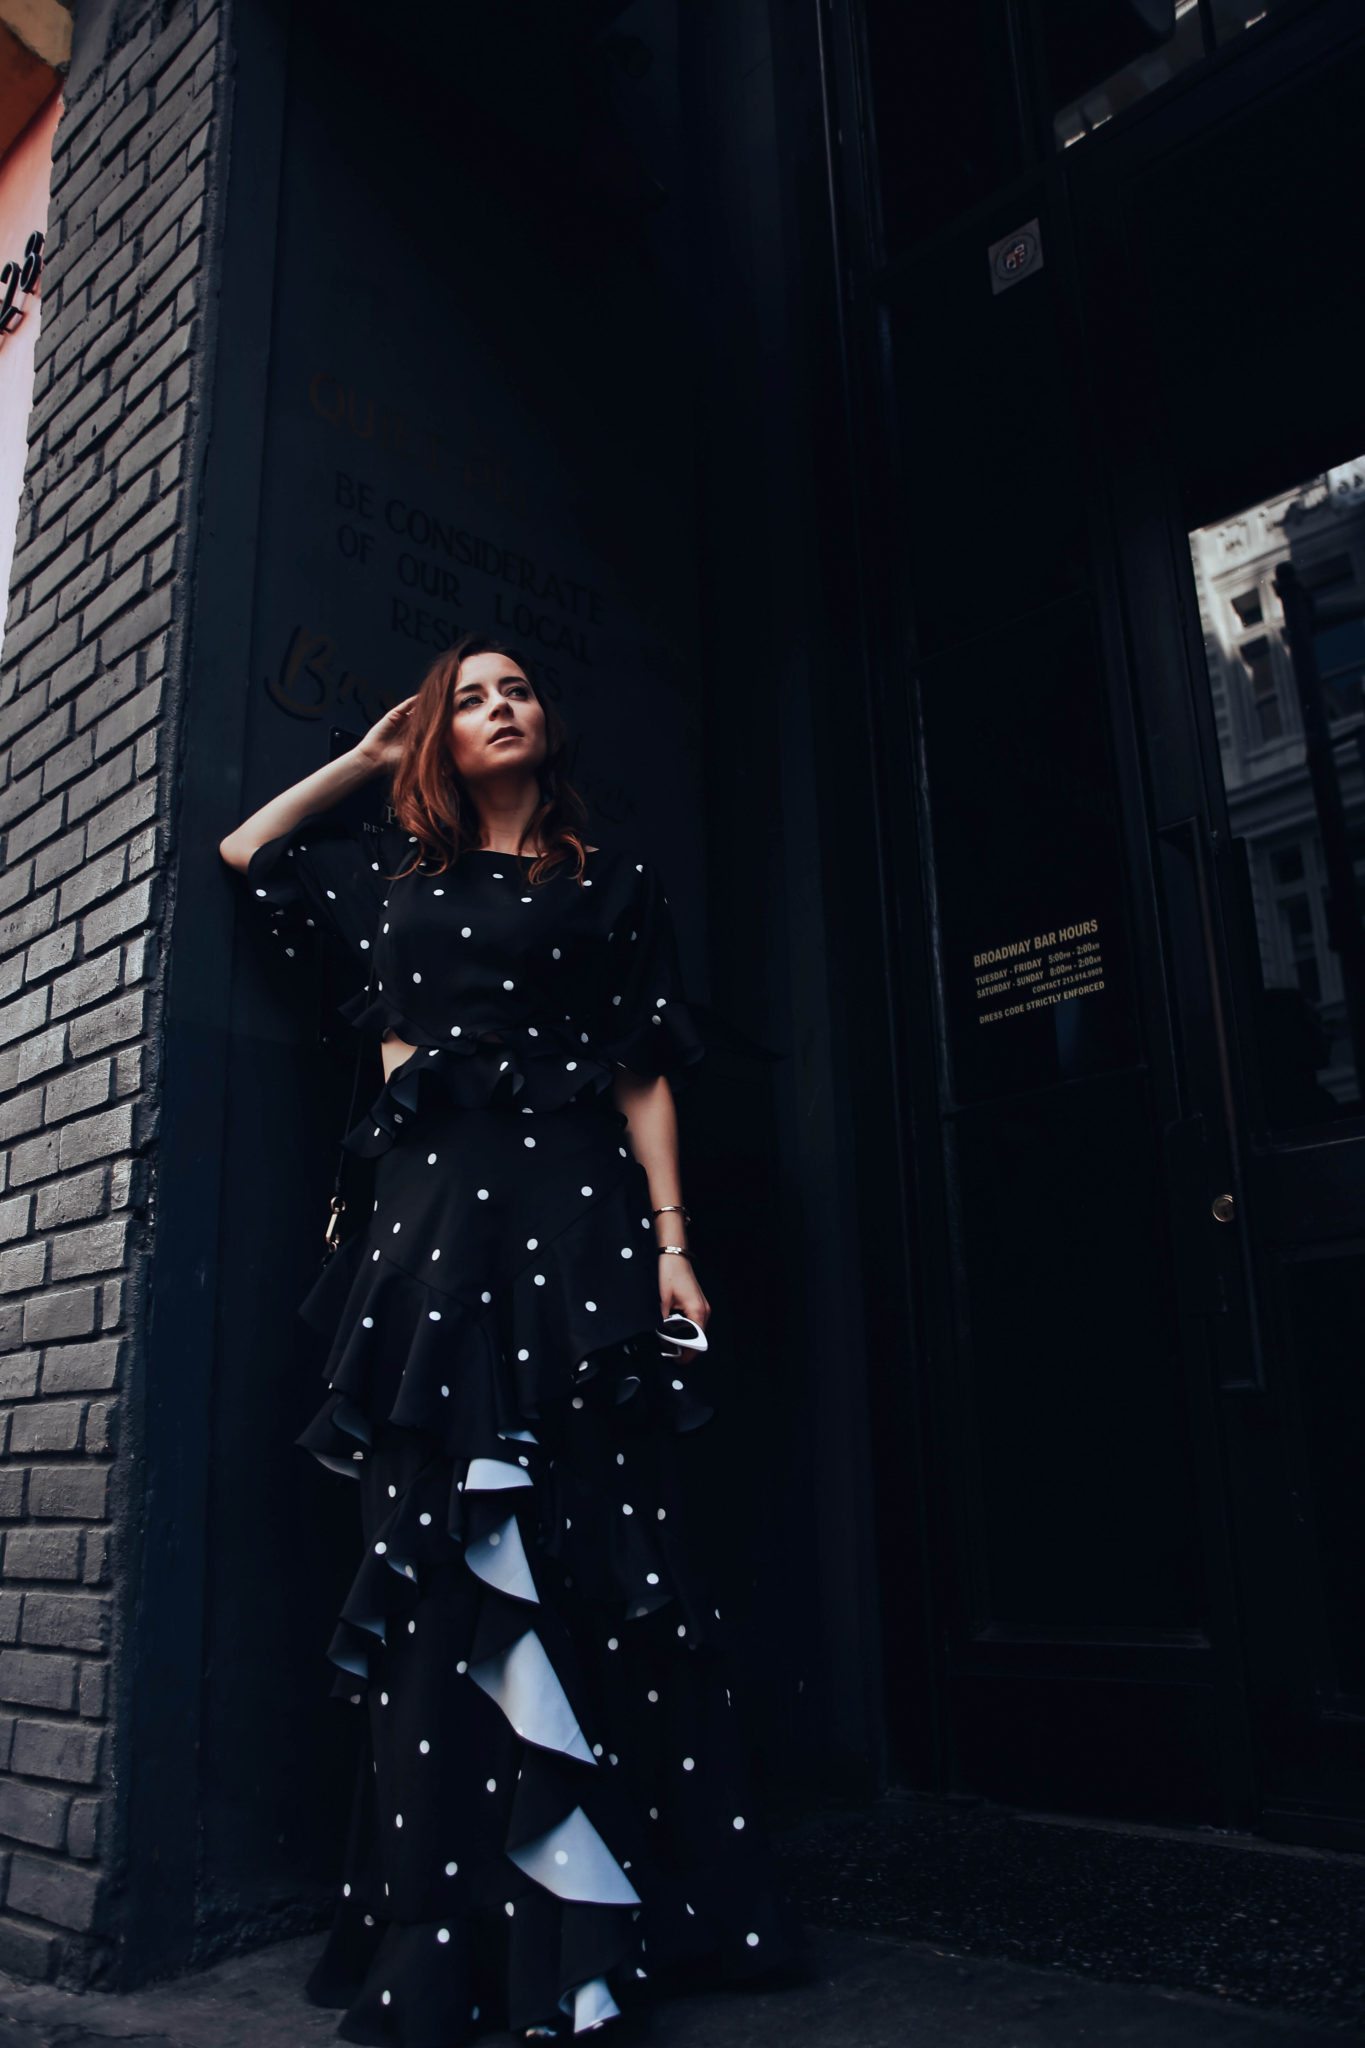 Evening dresses with Fame and Partners, A LA brand specialized in wedding party dresses. Julia Comil, French Fashion blogger in Los Angeles features the black and white polka dots Marisa dress from Fame and Partners - shot in Downtown Los Angeles